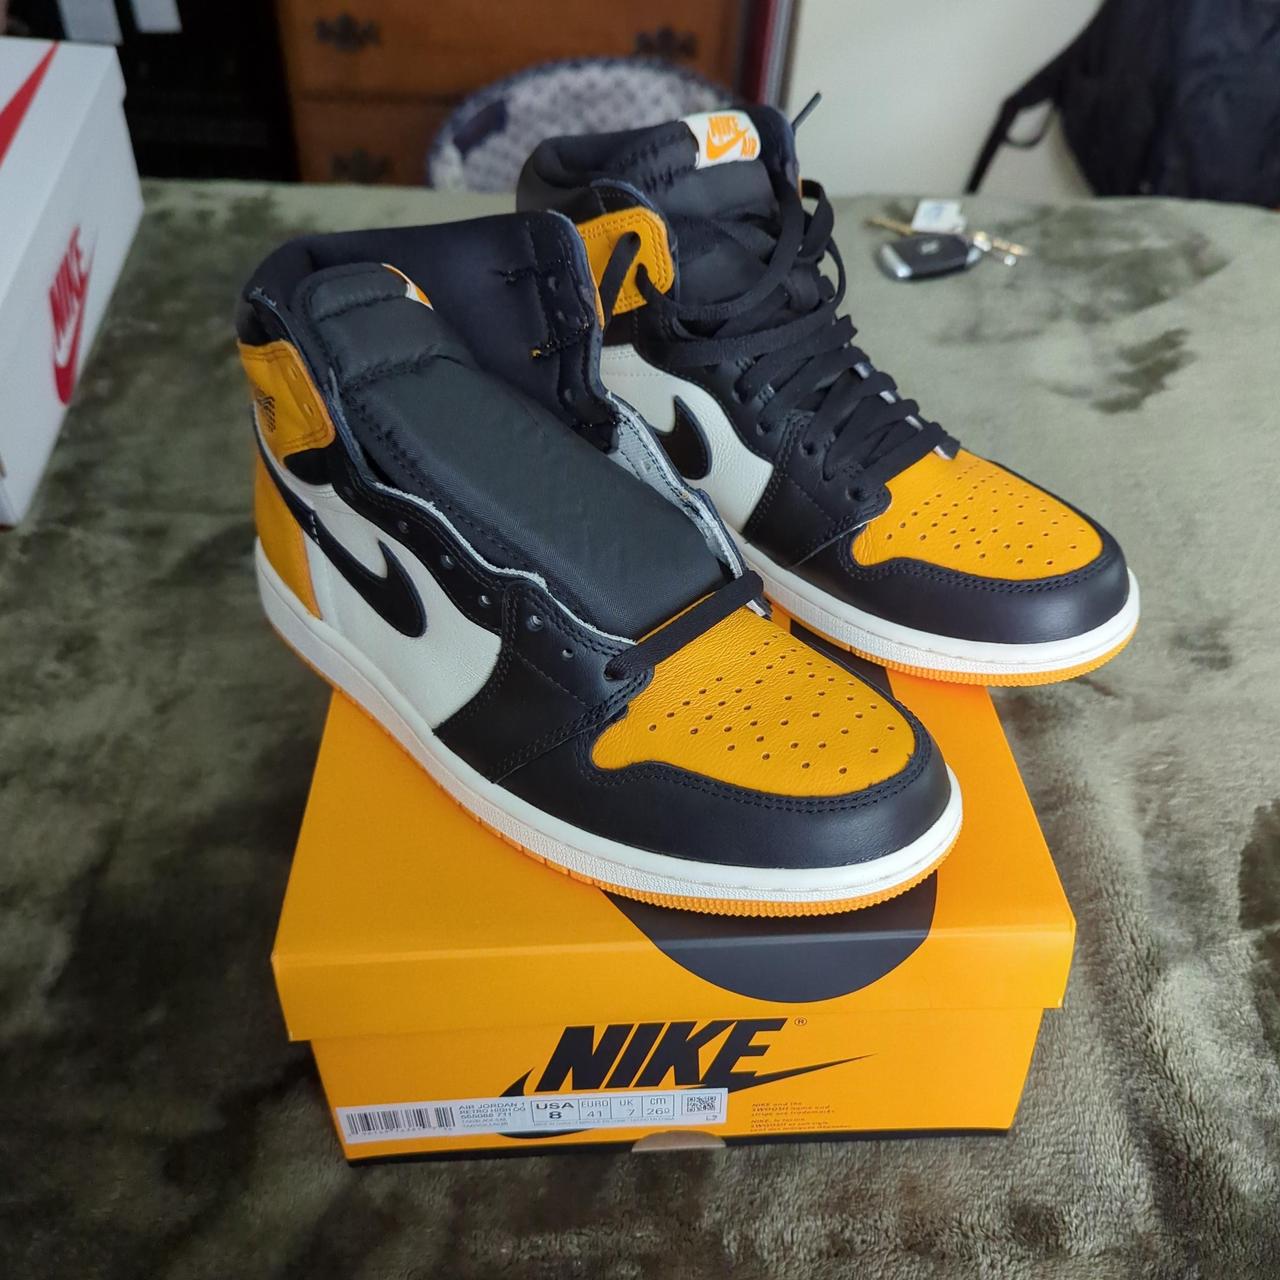 Jordan 1 high taxi. Never worn, only laced up the... - Depop